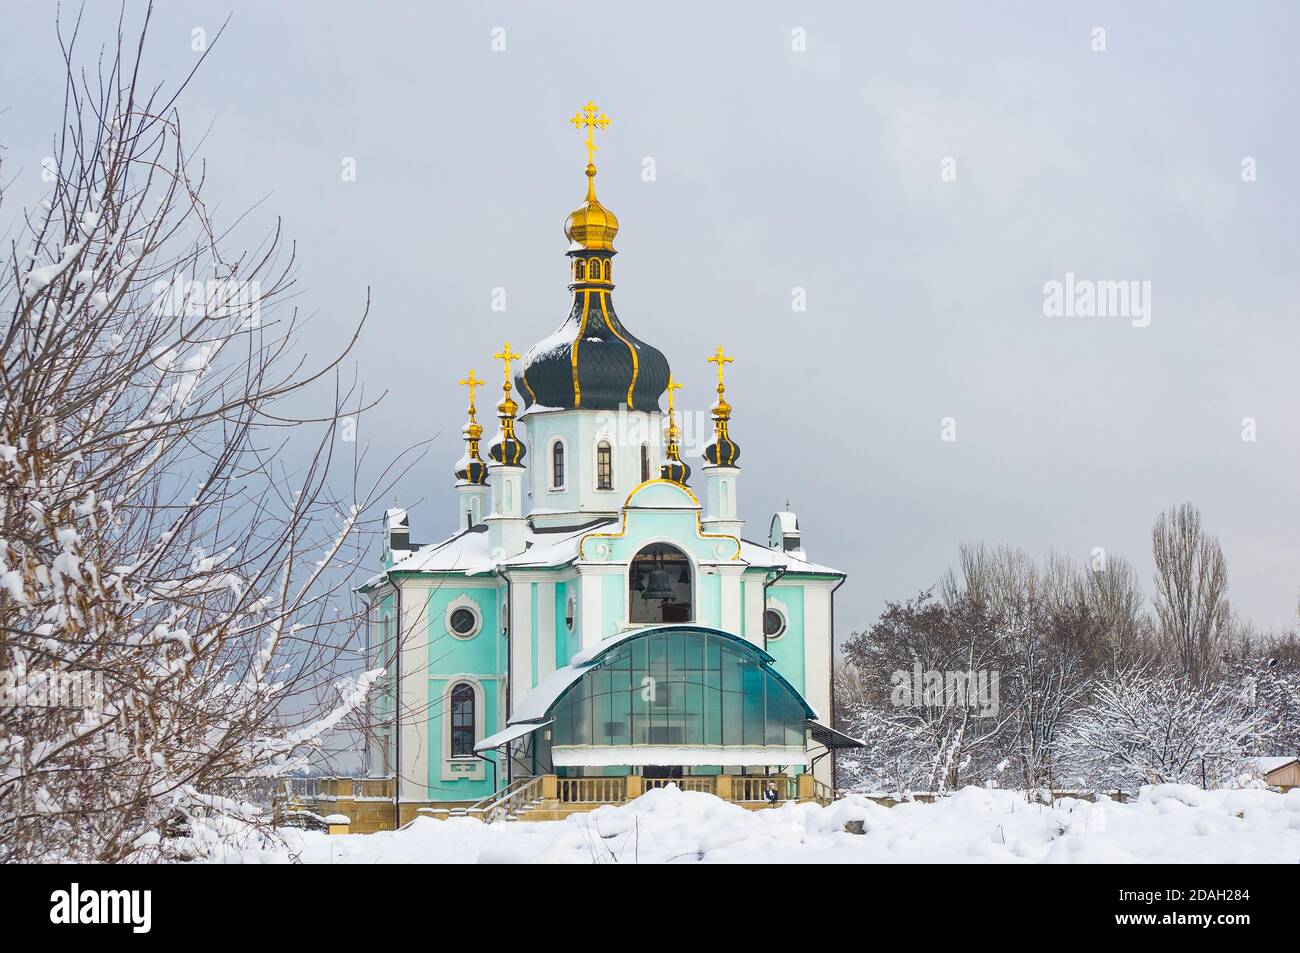 Winter landscape - Orthodox church in the snow among trees on a cold frosty day Stock Photo